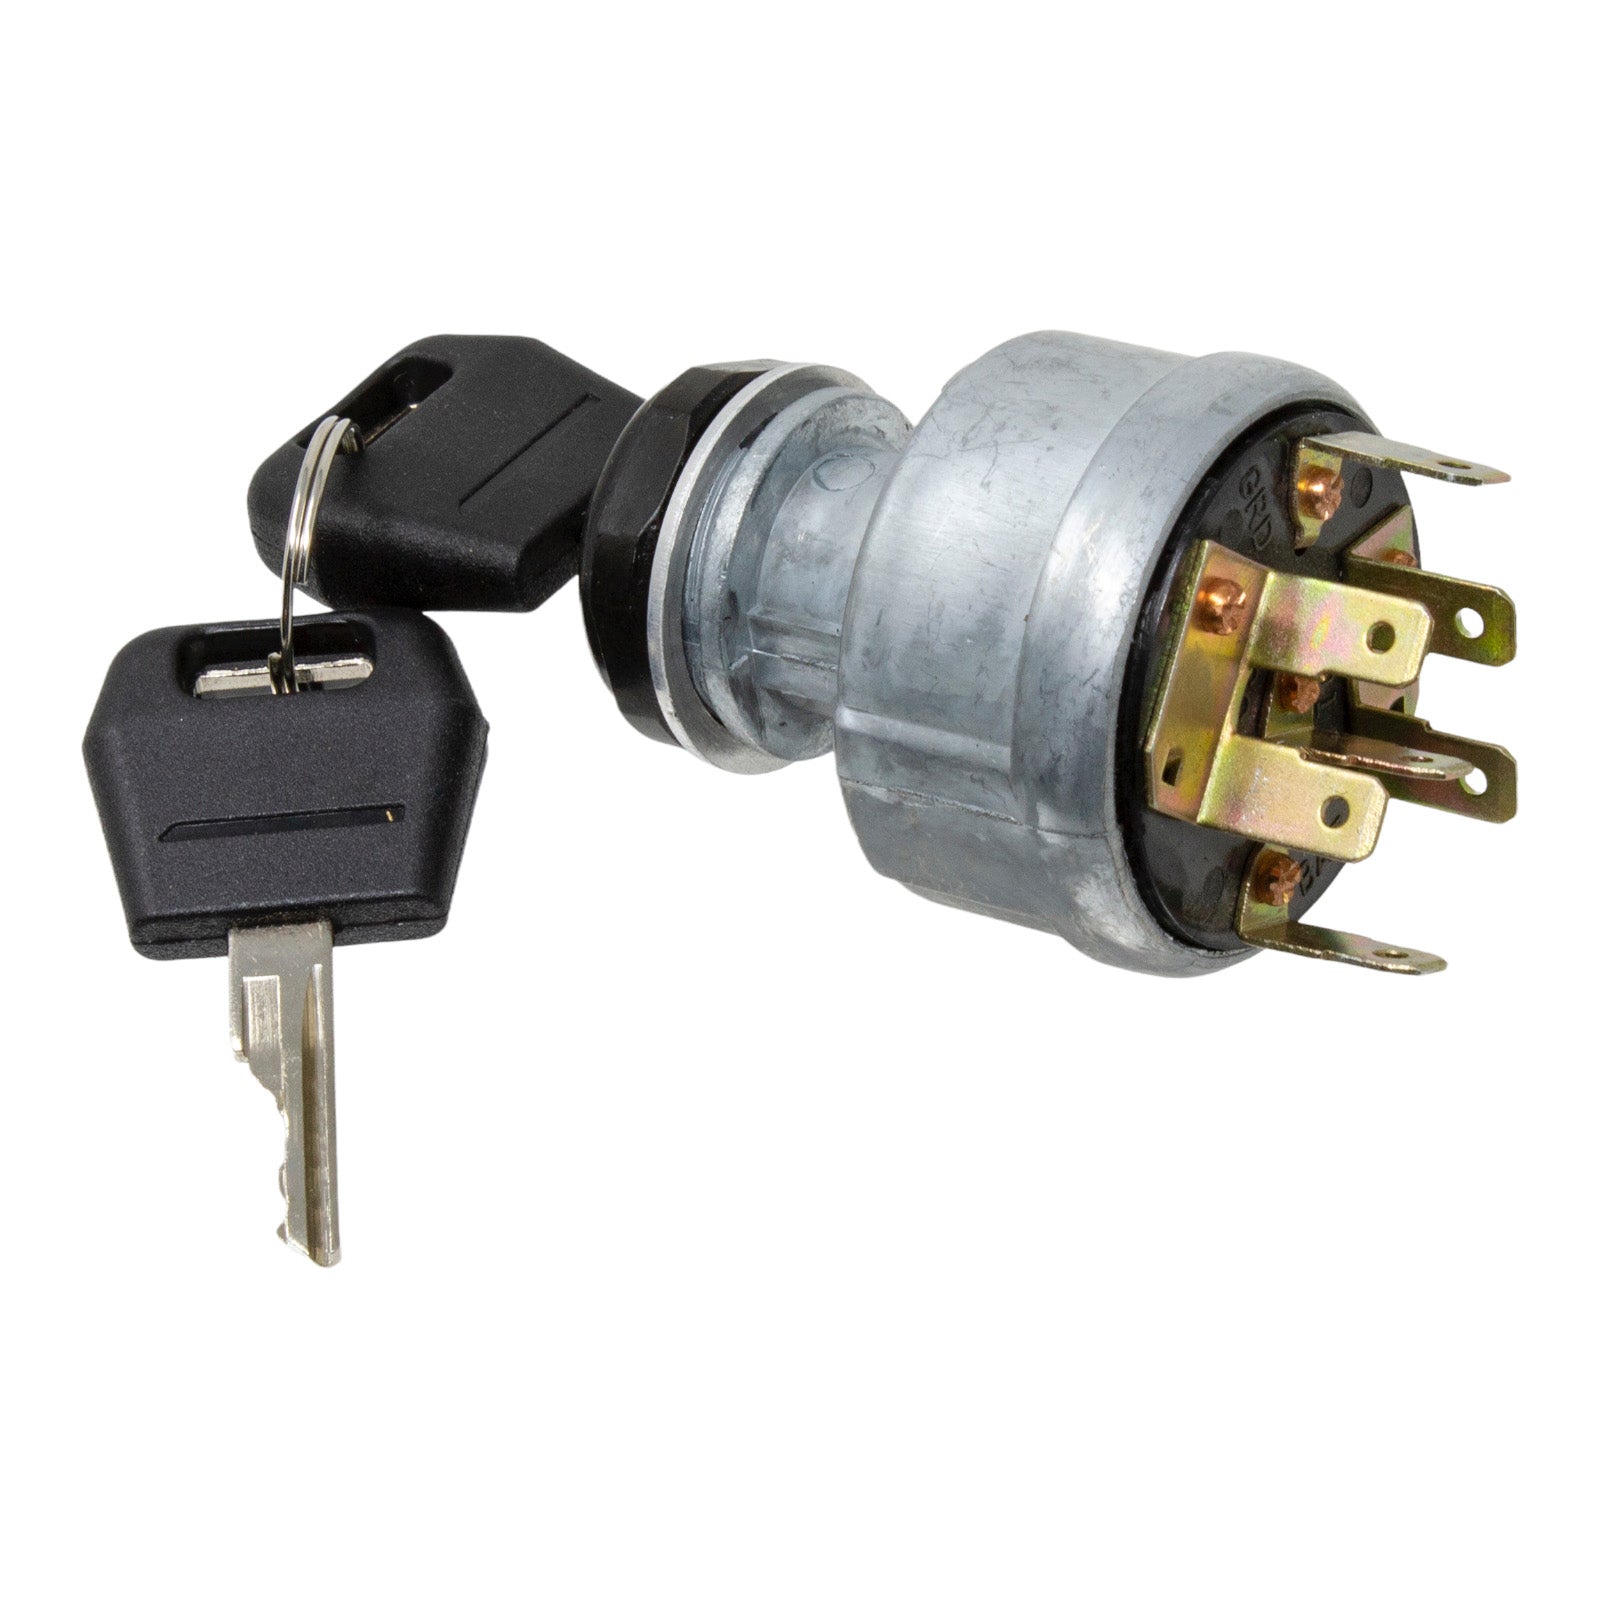 Duraforce A77312, Ignition Switch For Case IH